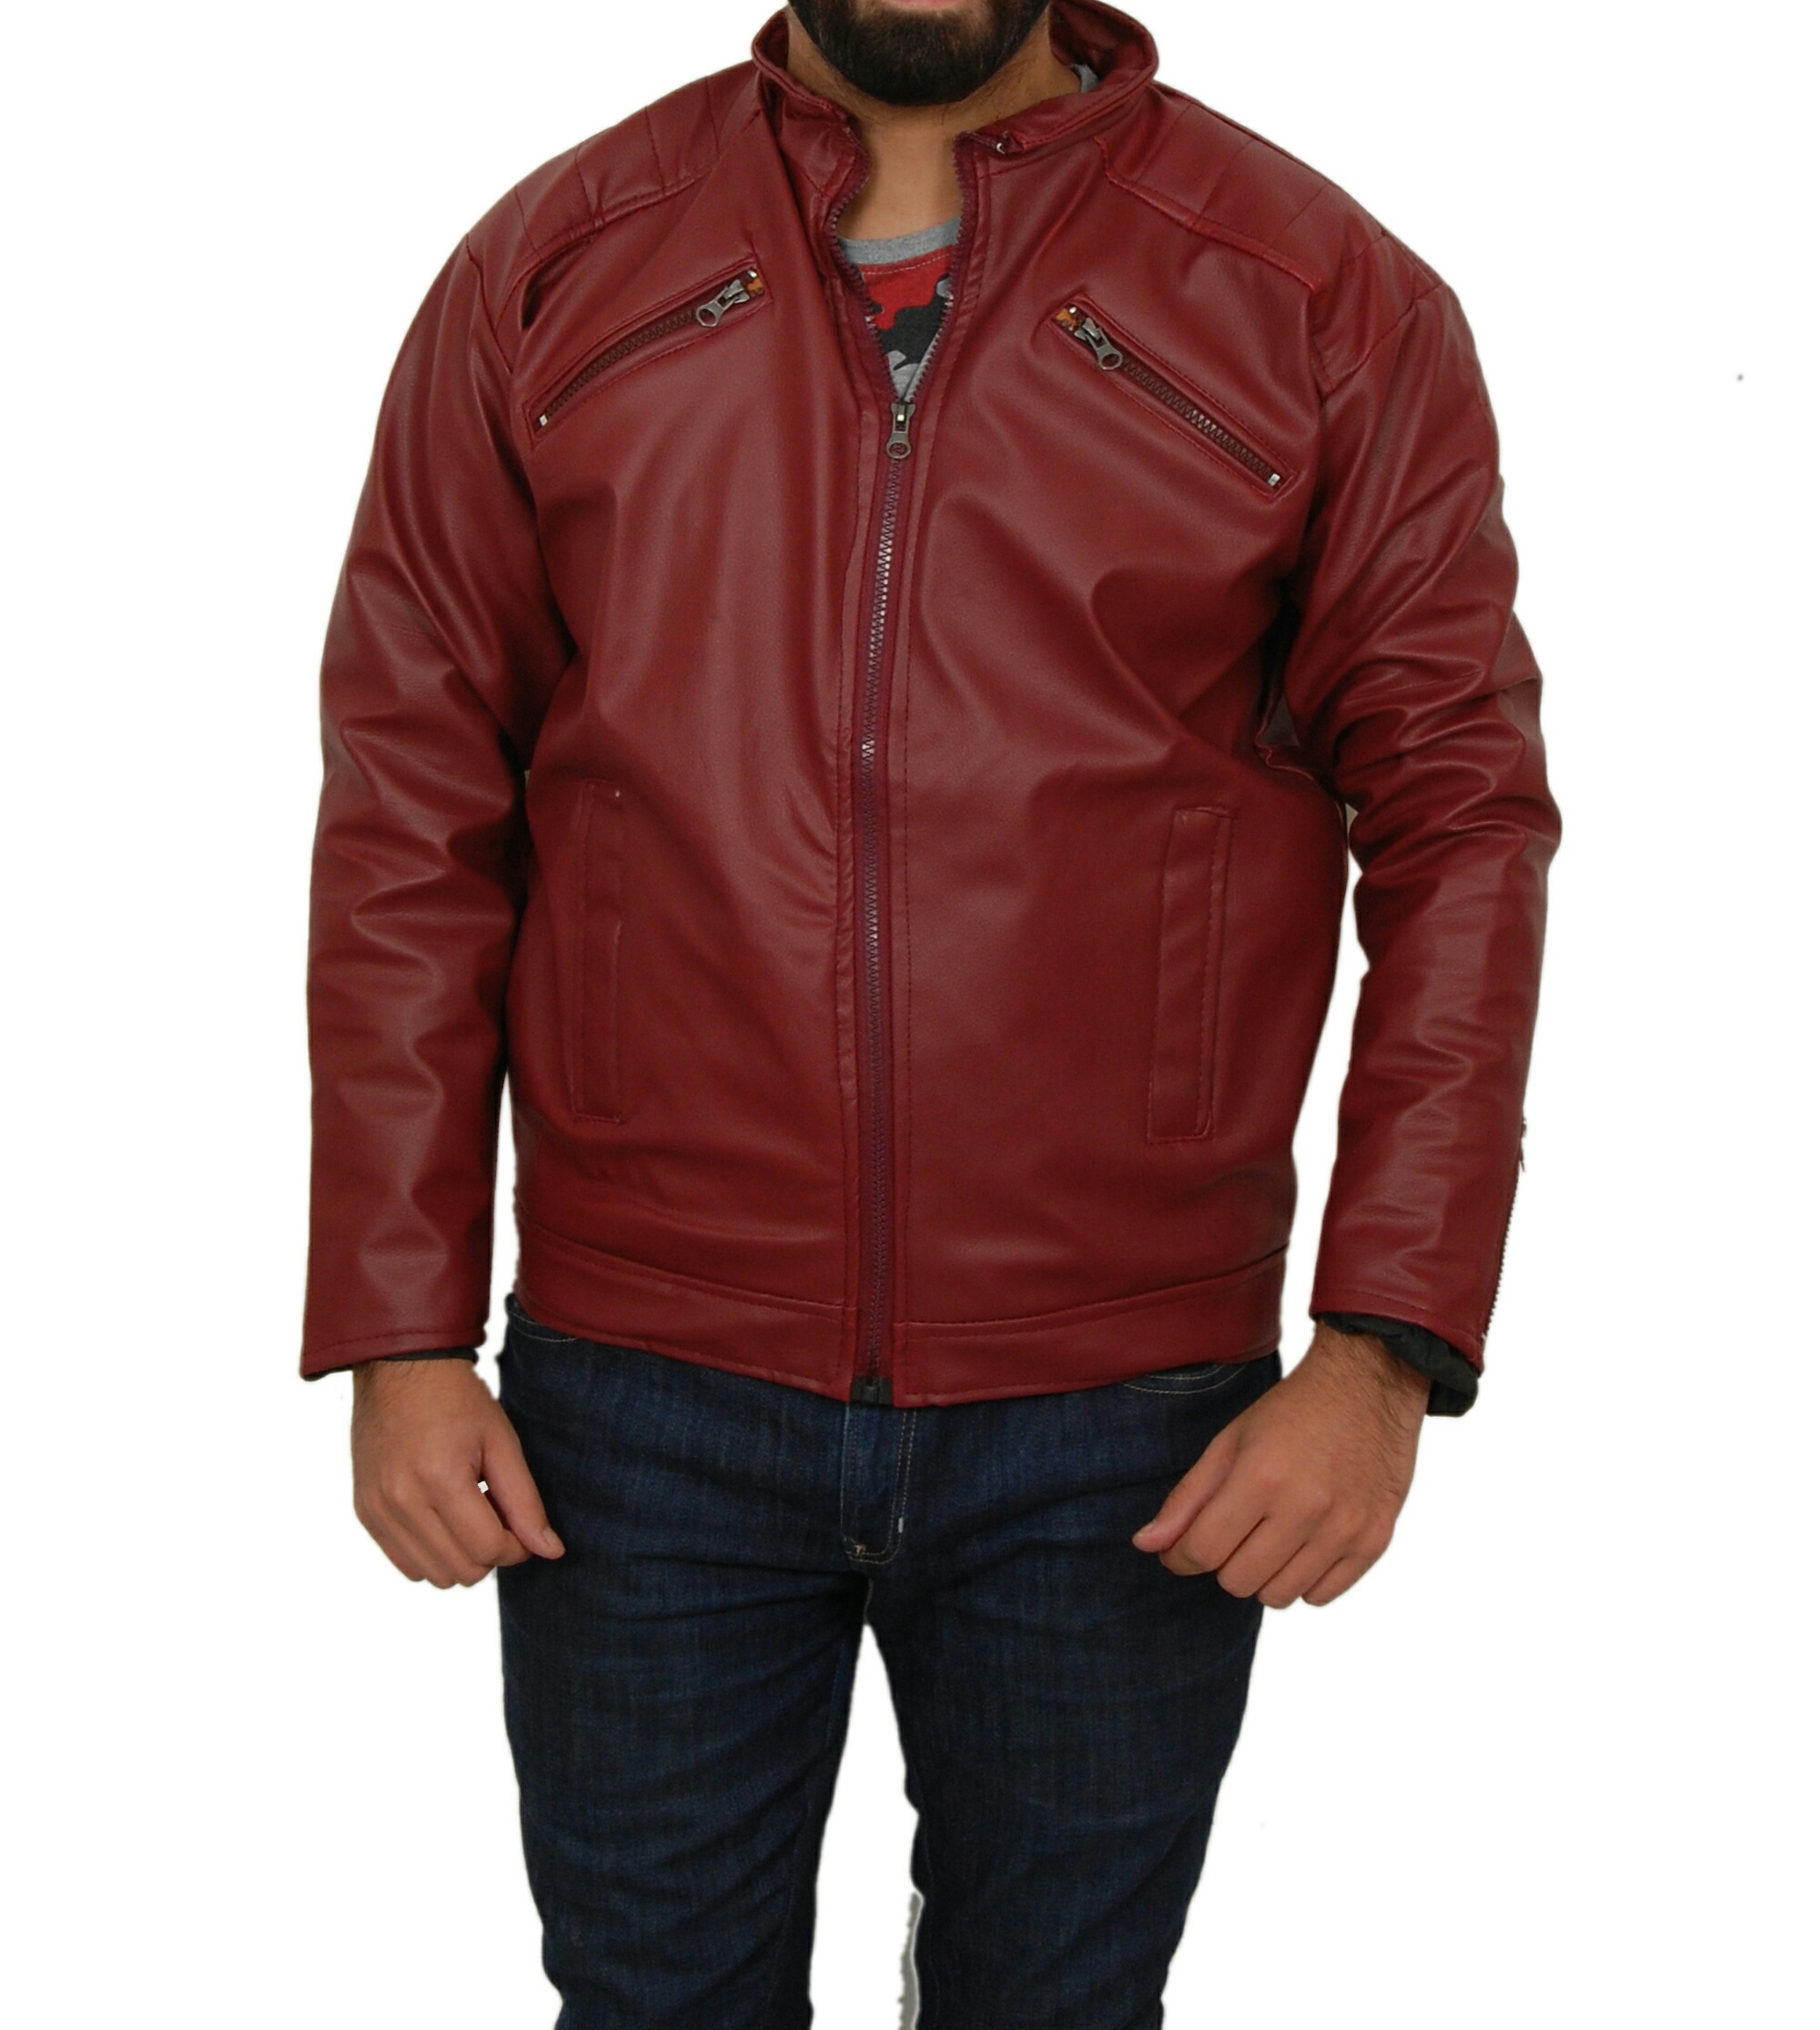 Buy men's stylish faux leather jacket Online @ ₹749 from ShopClues